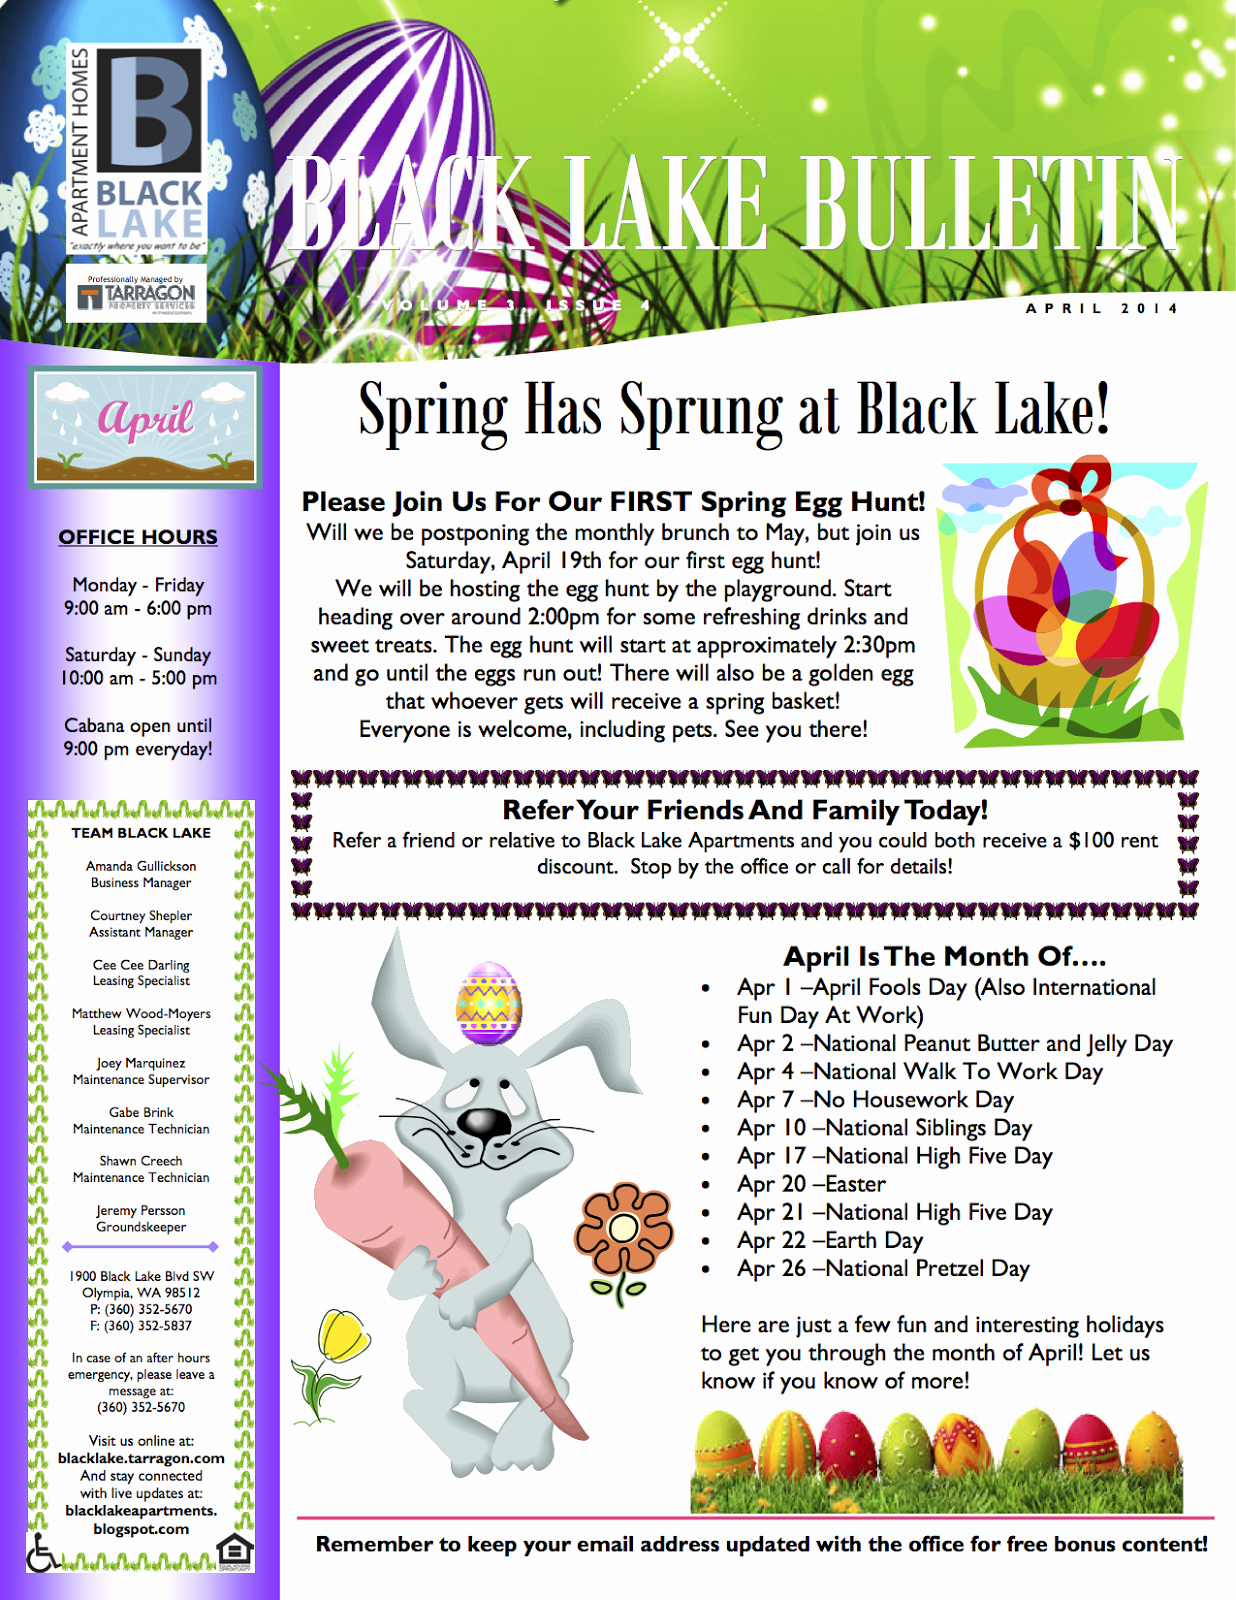 April Newsletter Template Inspirational Newsletter Ideas April is the Month Of